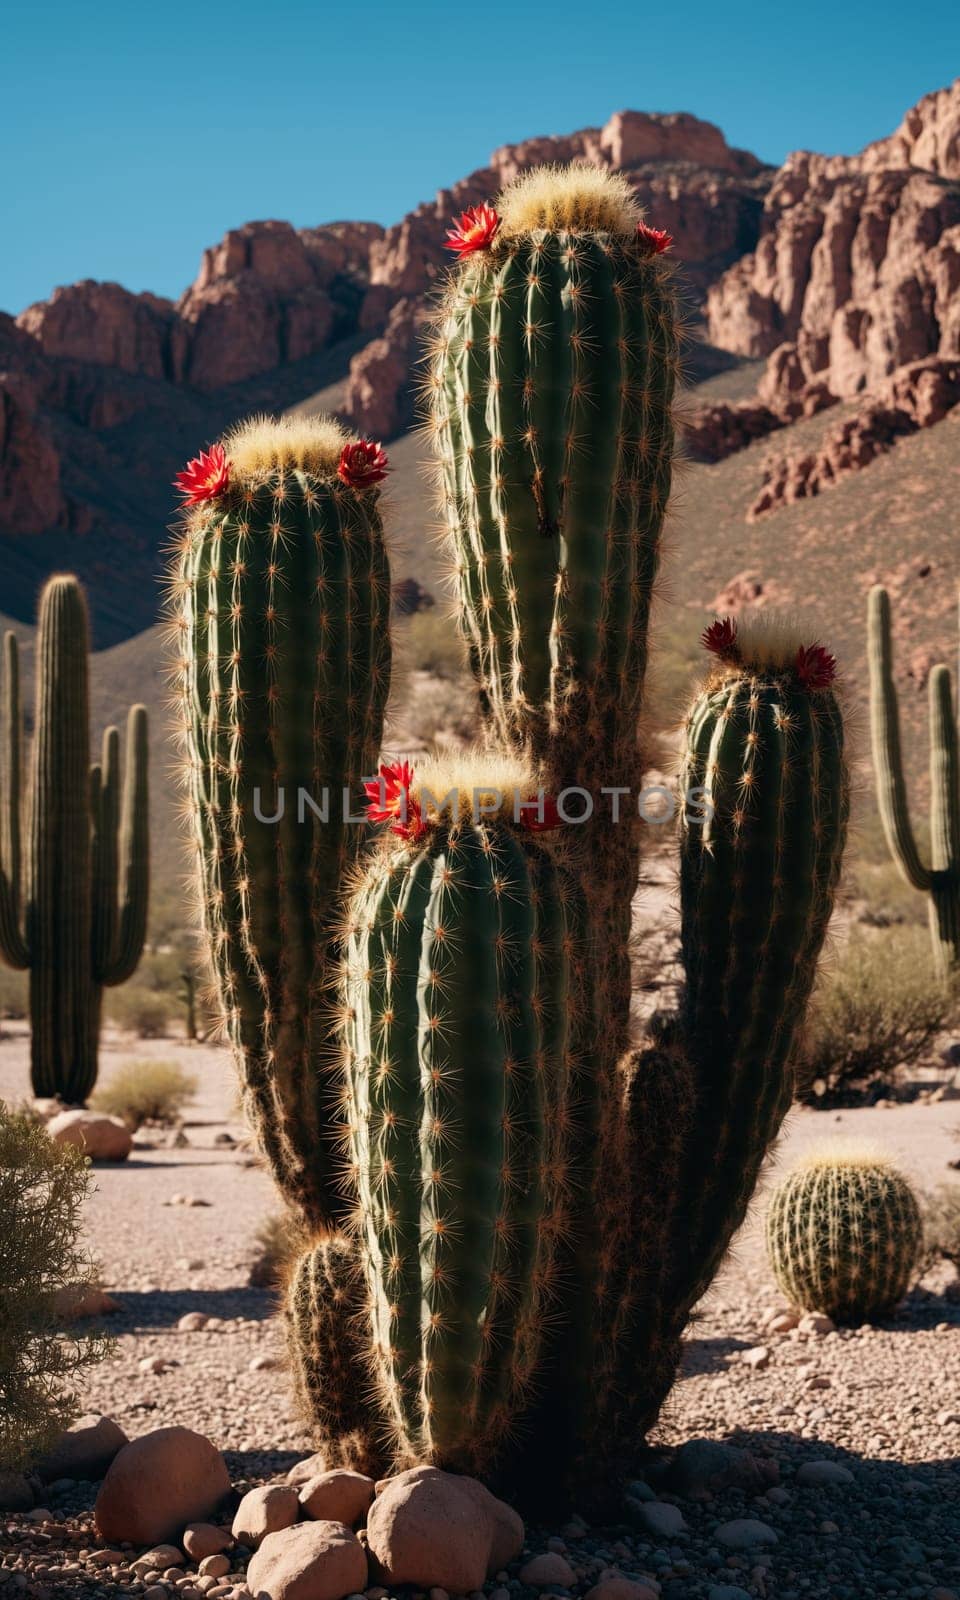 Prickly cactus in the desert close-up by Andre1ns